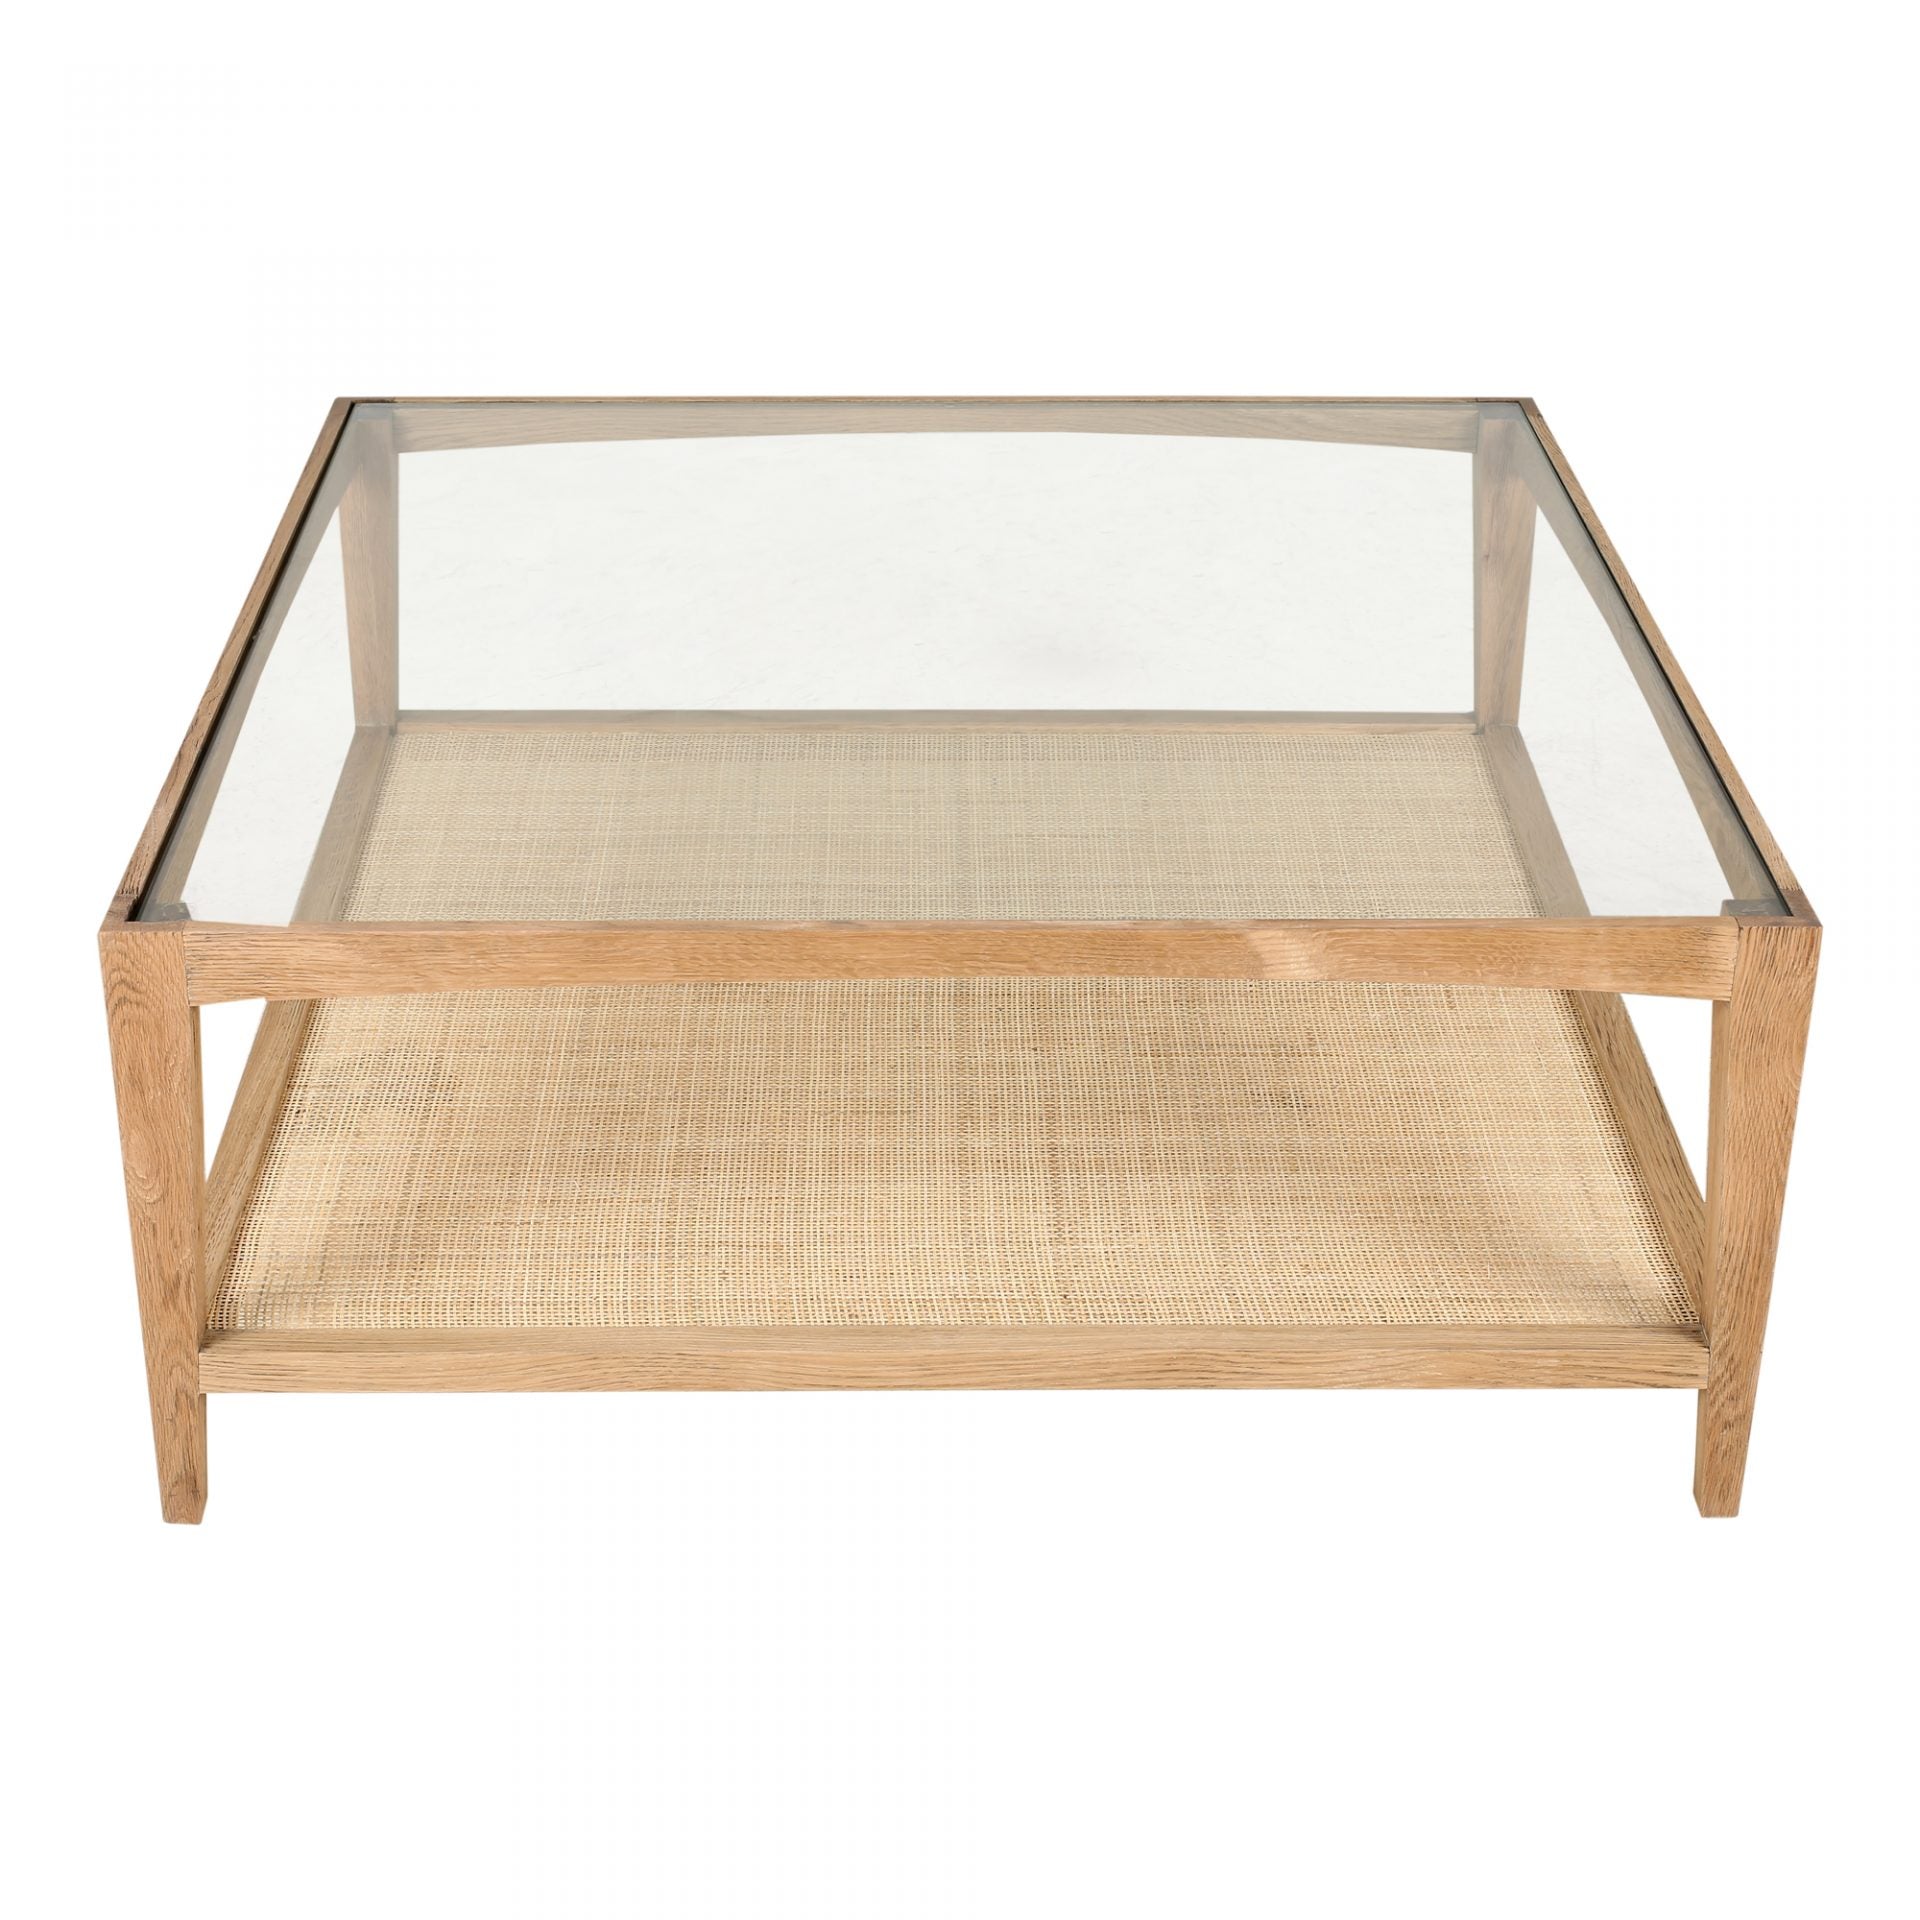 Both functional and beautiful, this Harrington Coffee Table features a natural cane shelf, perfect for storing your favorite books, magazines, or other accessories!   Dimensions: 39.5"W x 39.5"D x 16.5"H Materials:  Solid Oak Frame, Tempered Glass Top, Natural Cane Shelf